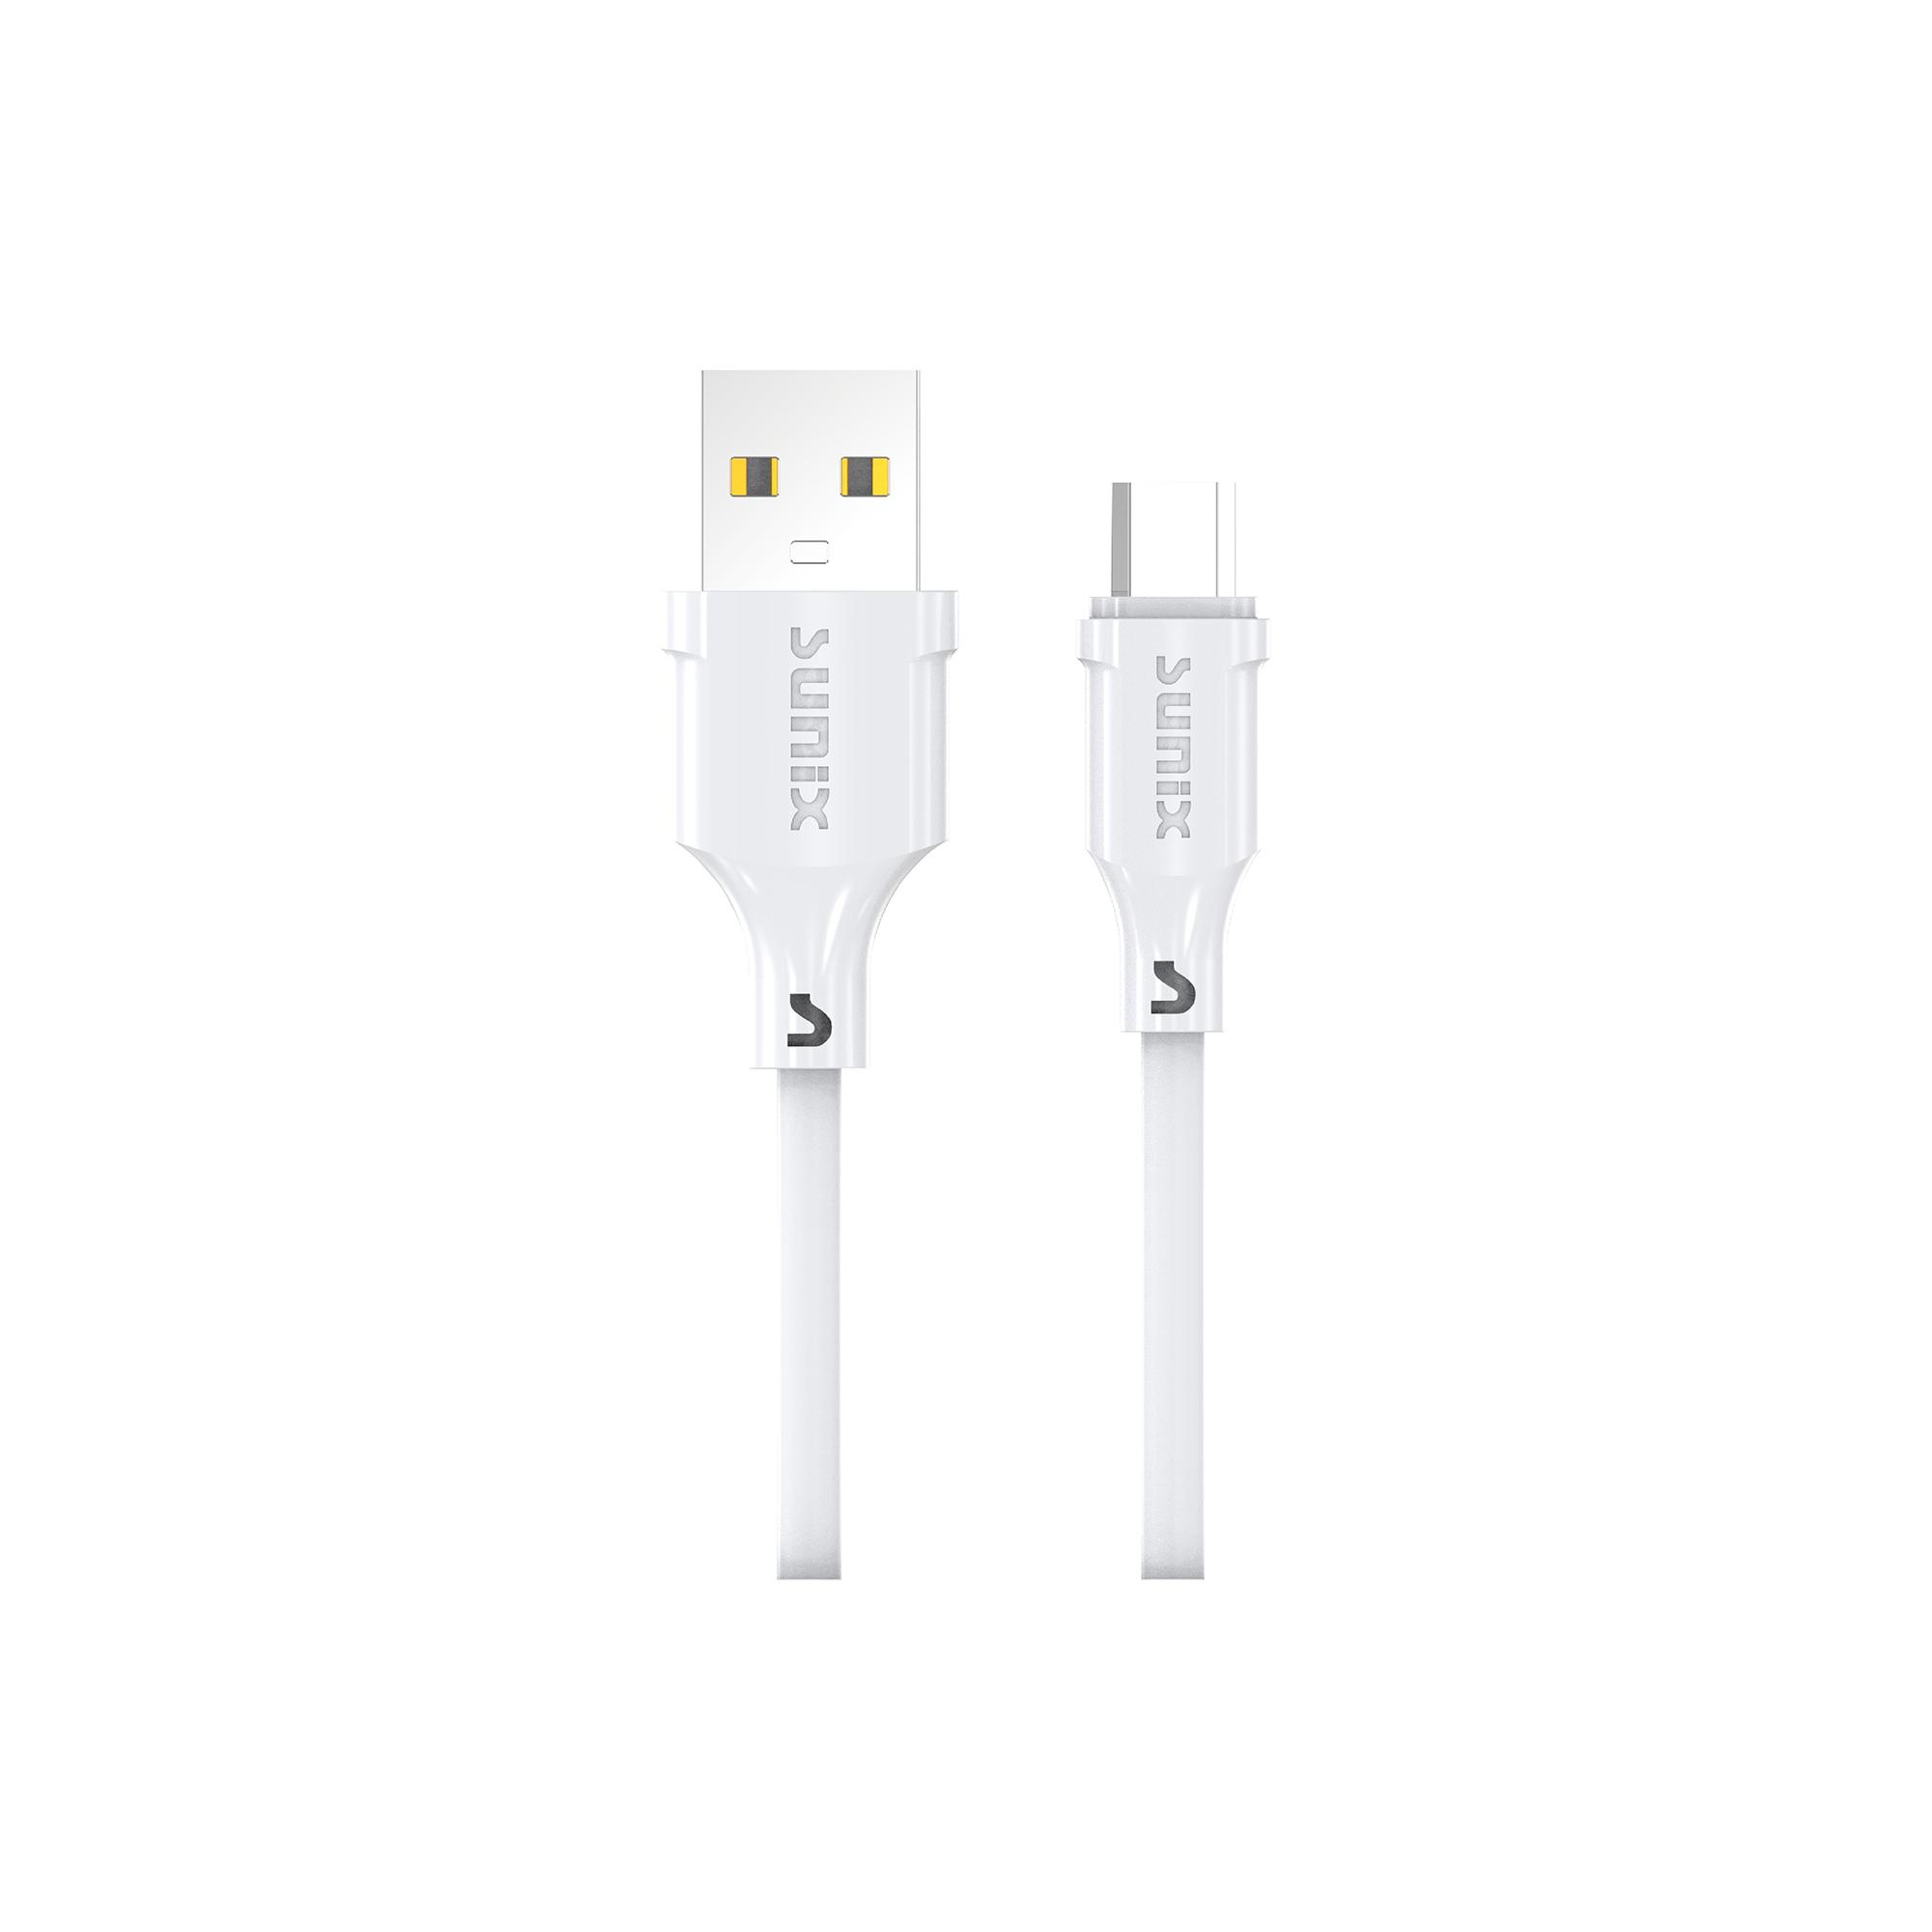 Sunix SC-70/71/72 Charge/sync cable